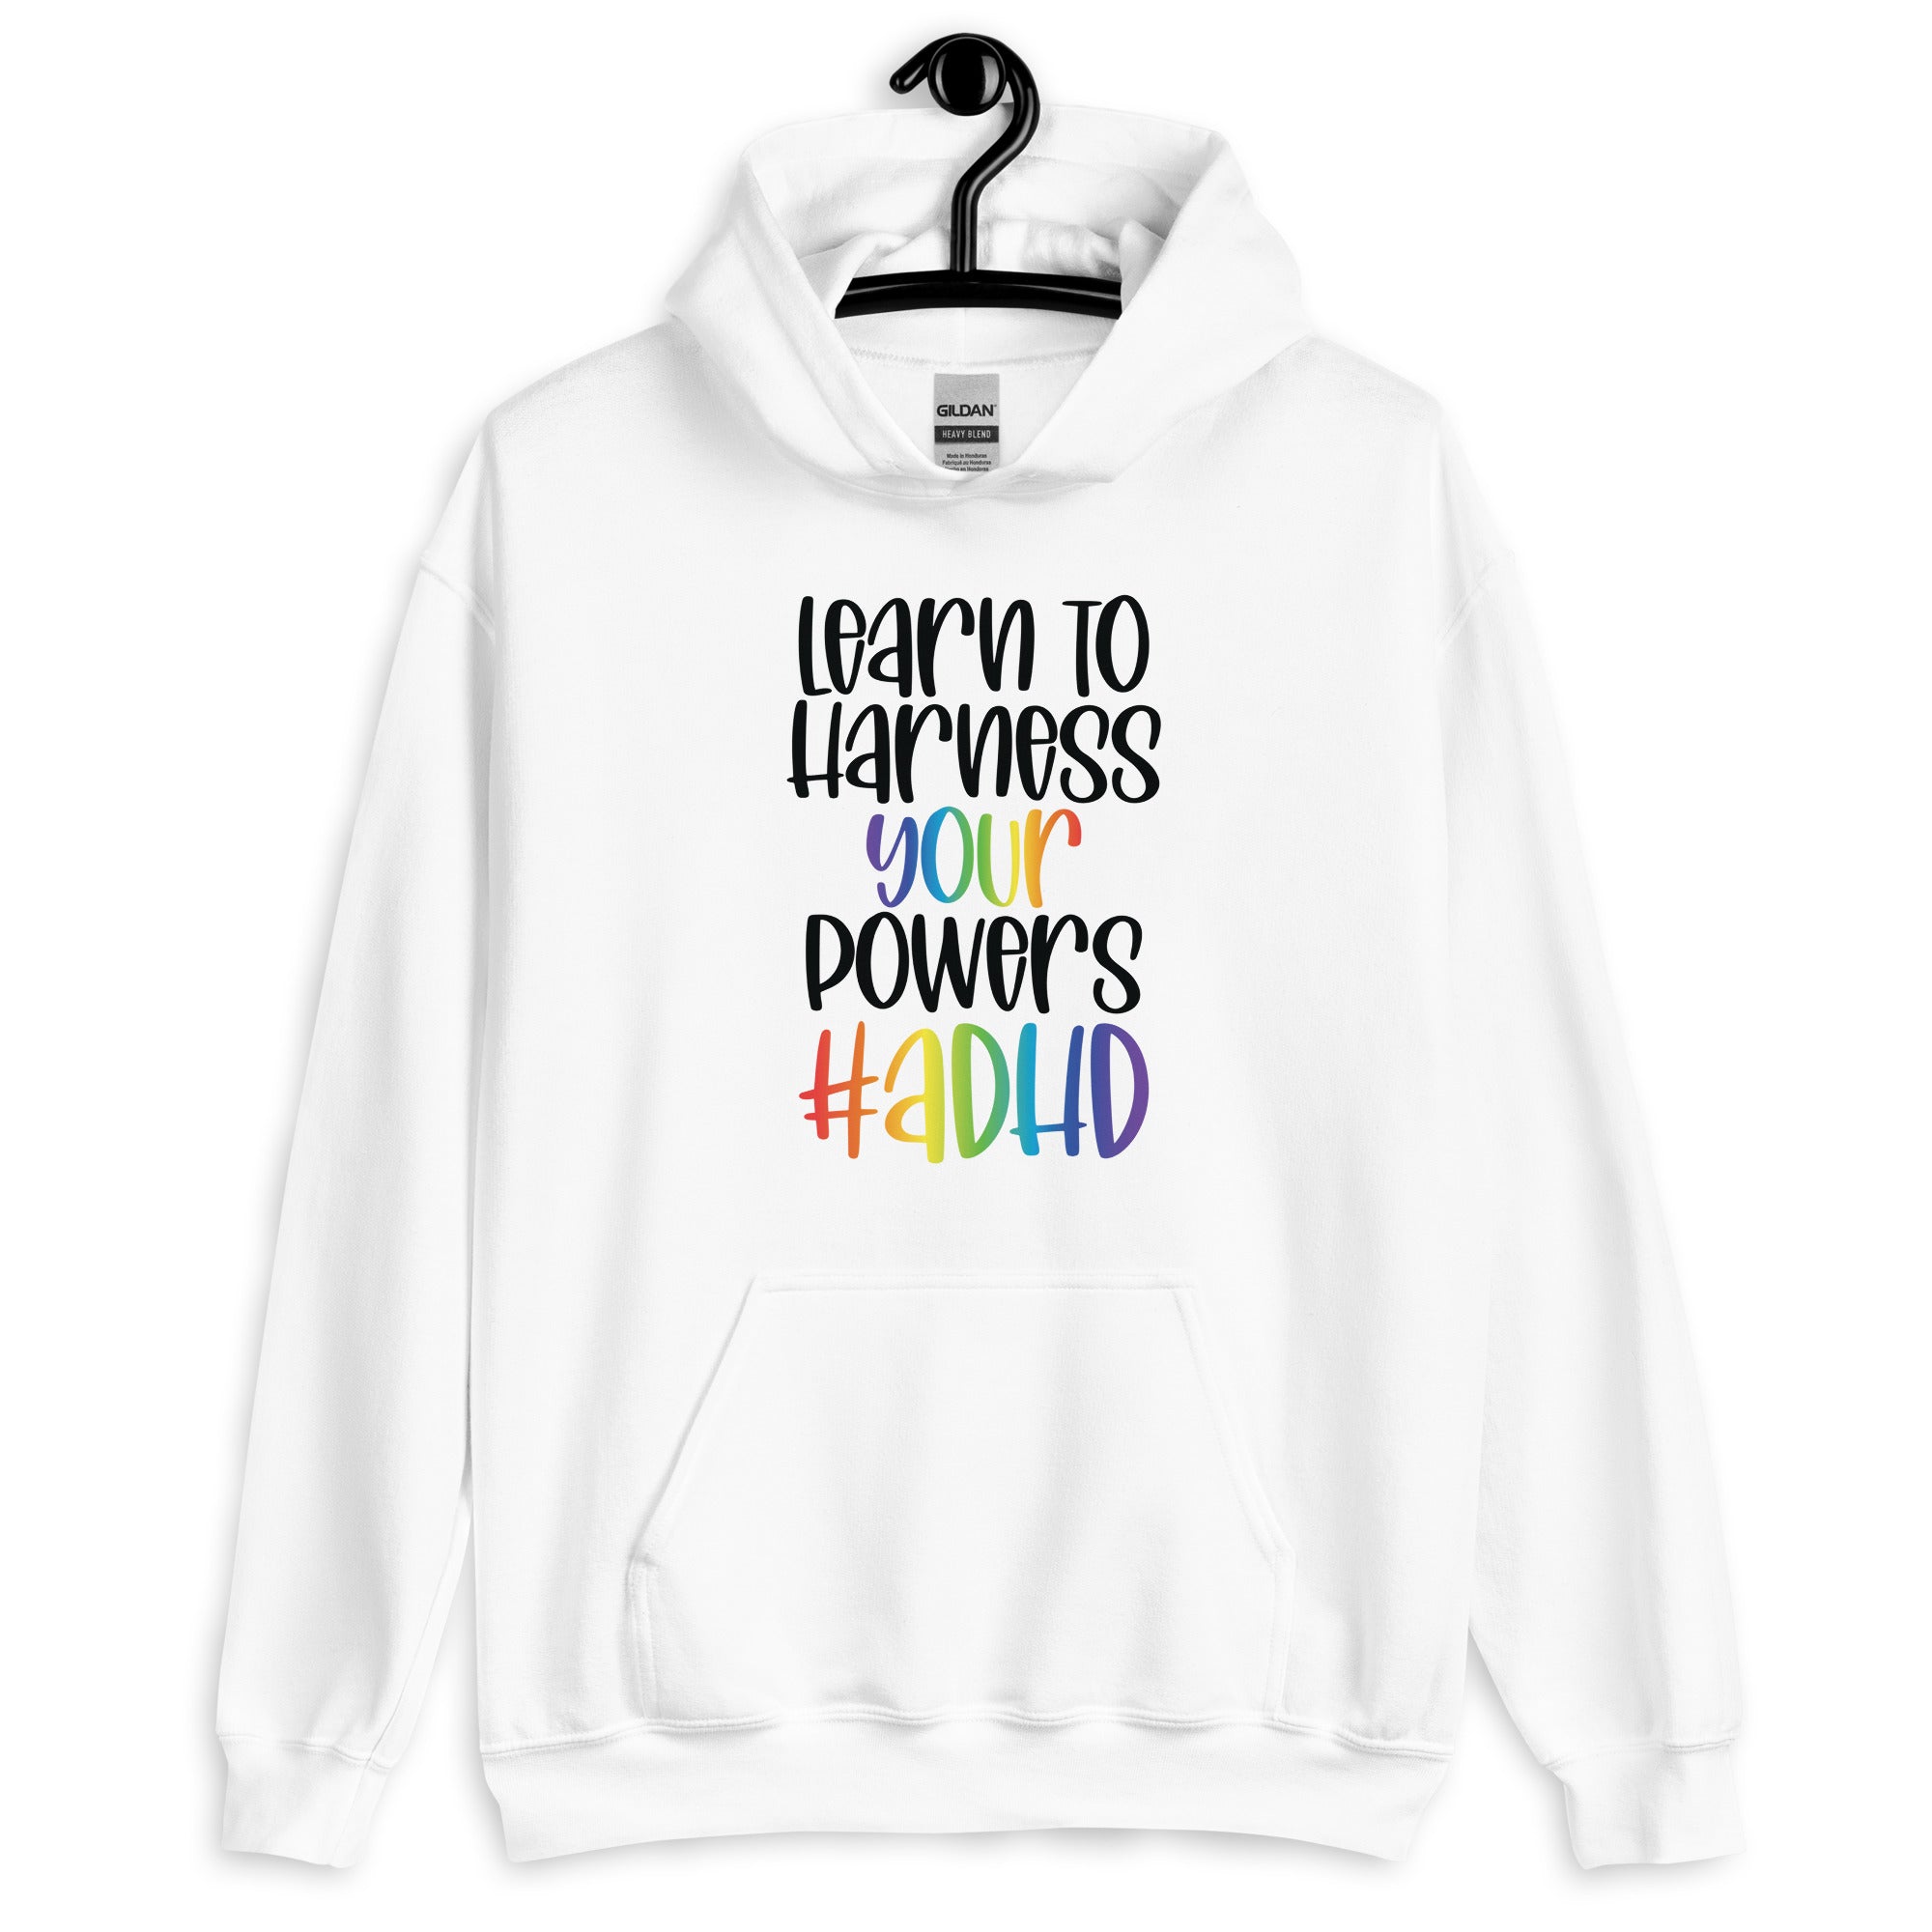 Unisex Hoodie- ADHD- Learn To Harness